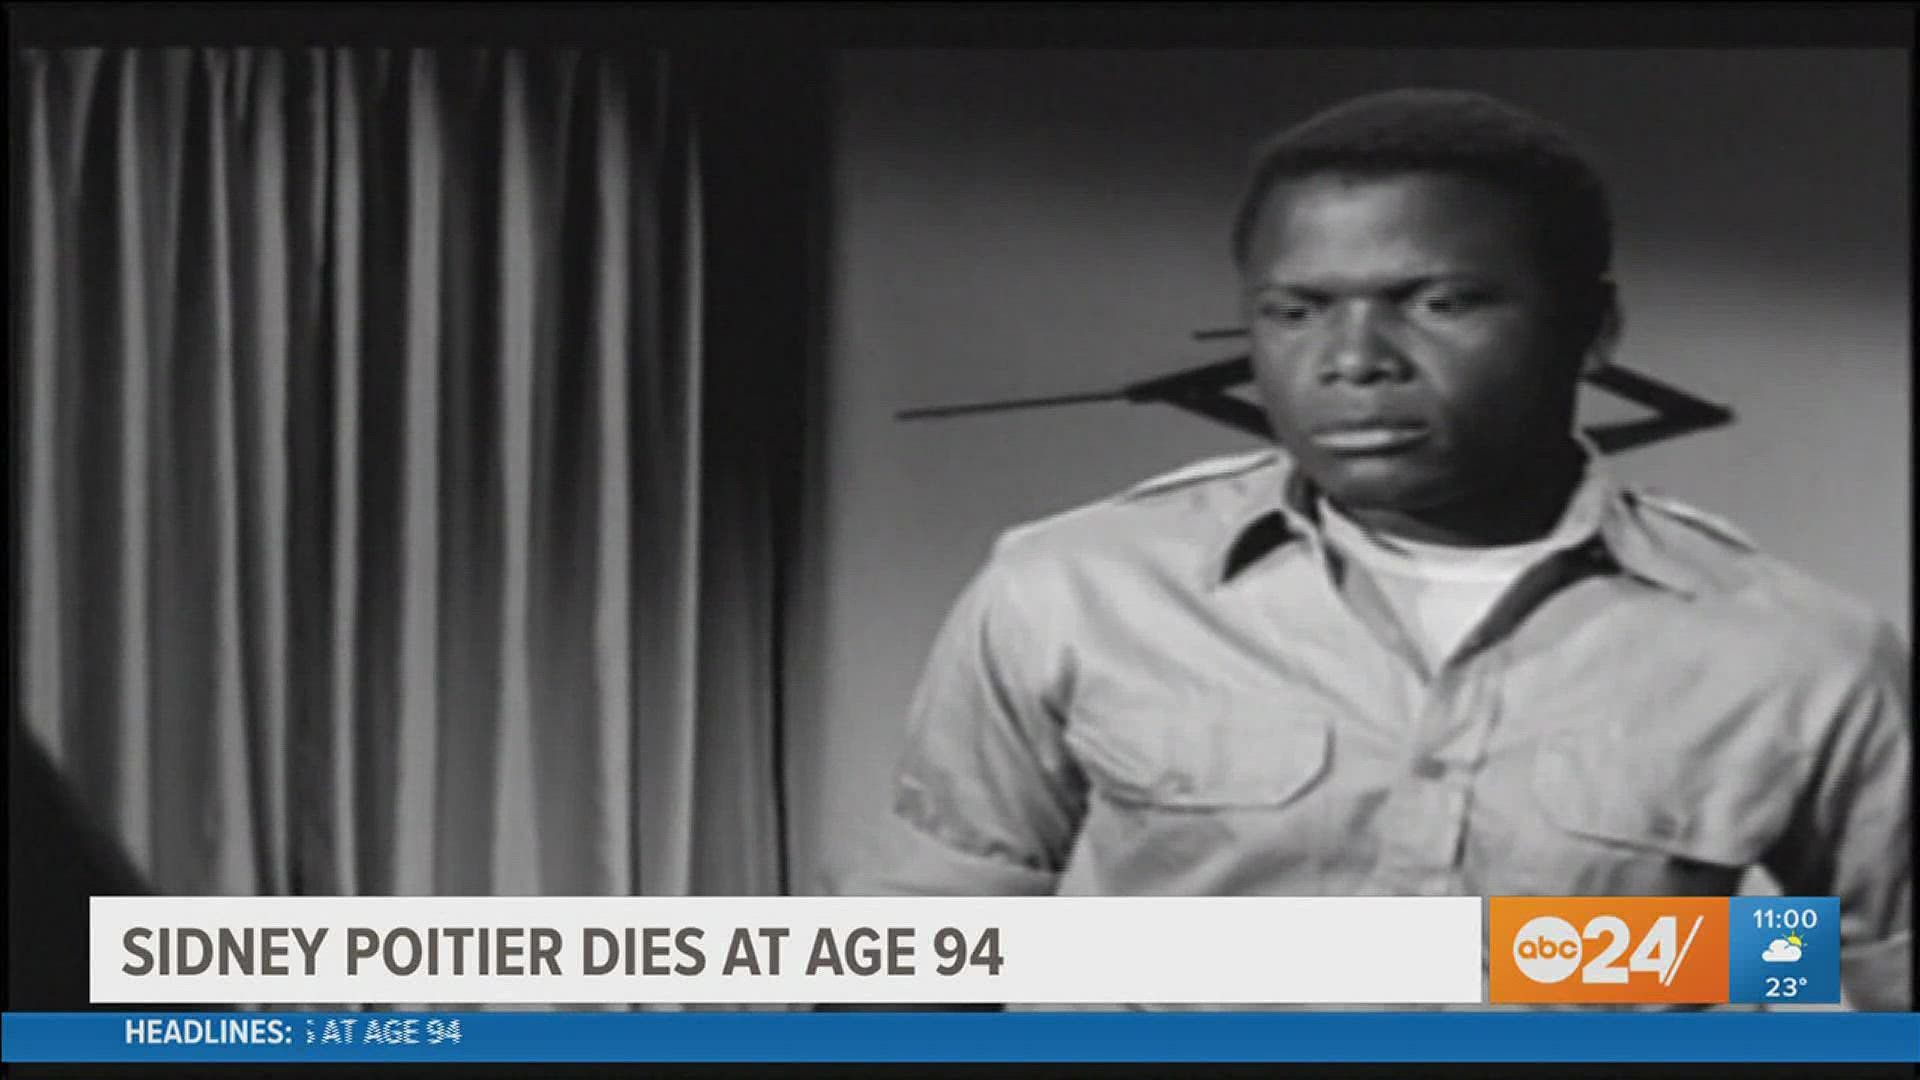 In 1964, Sidney Poitier made history when he won the Academy Award for Best Actor for "Lilies of the Field."